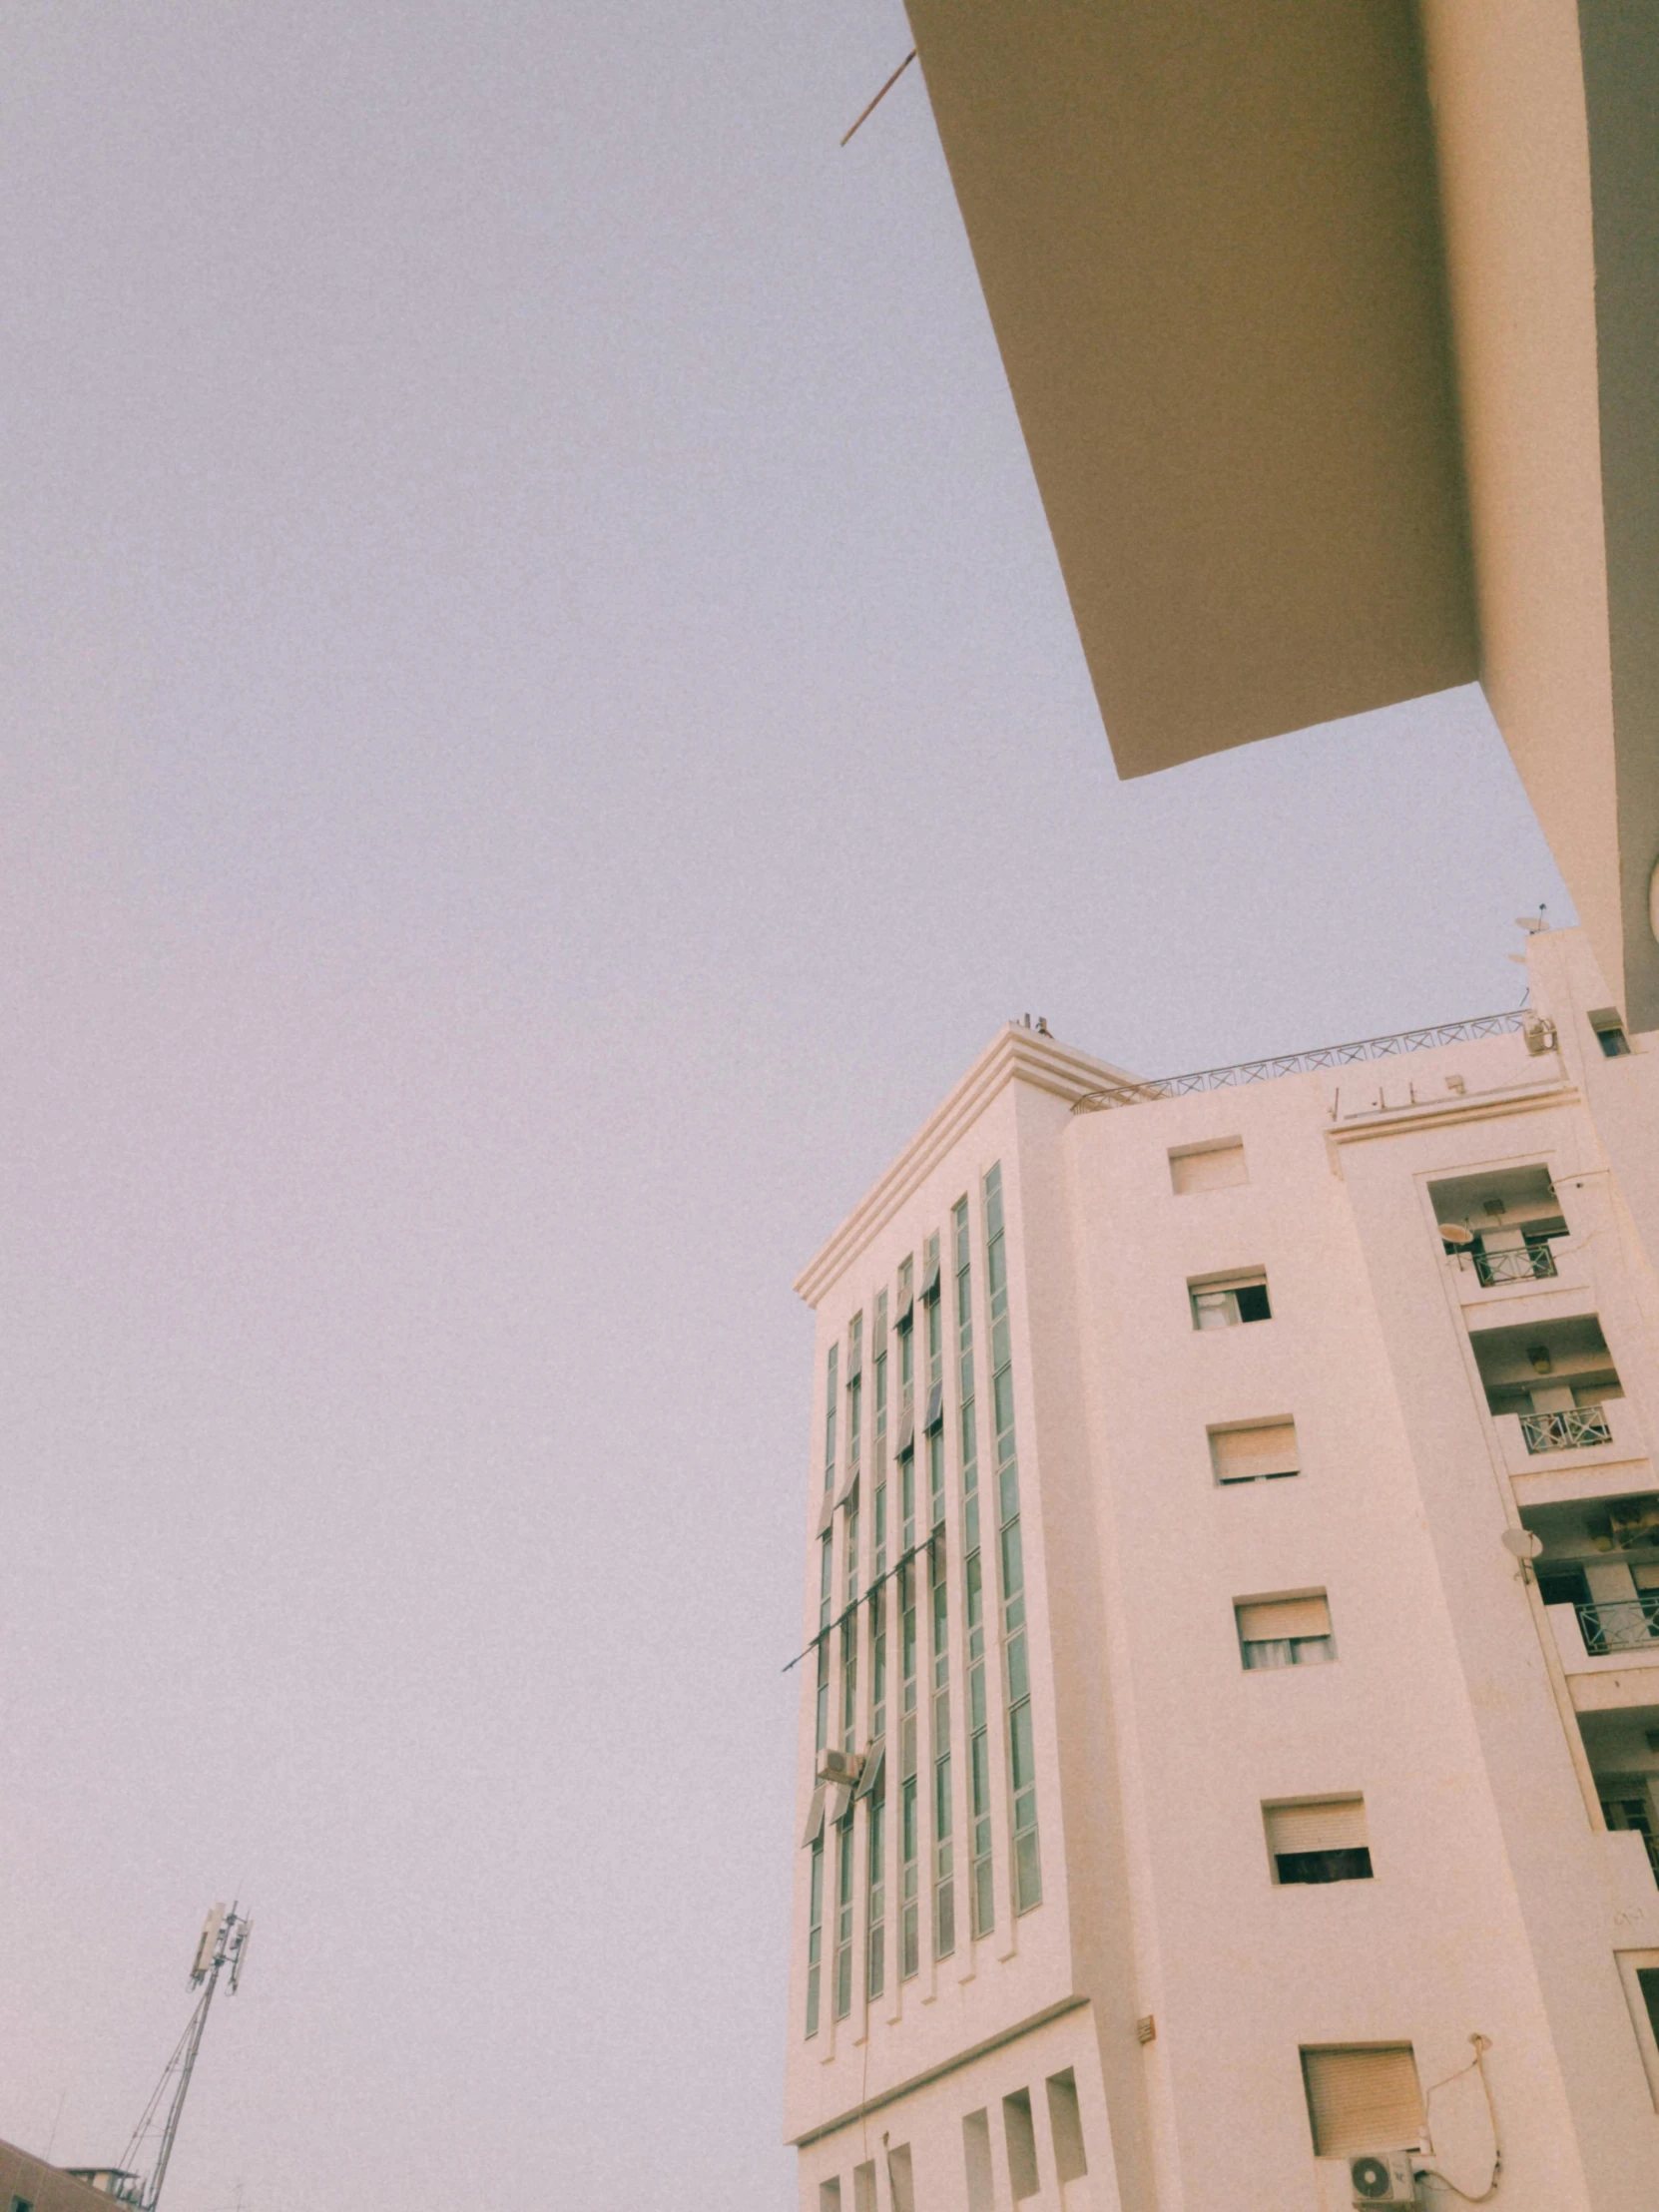 a man flying through the air while riding a skateboard, a polaroid photo, unsplash, postminimalism, big poor building, moroccan city, ((oversaturated)), multistory building